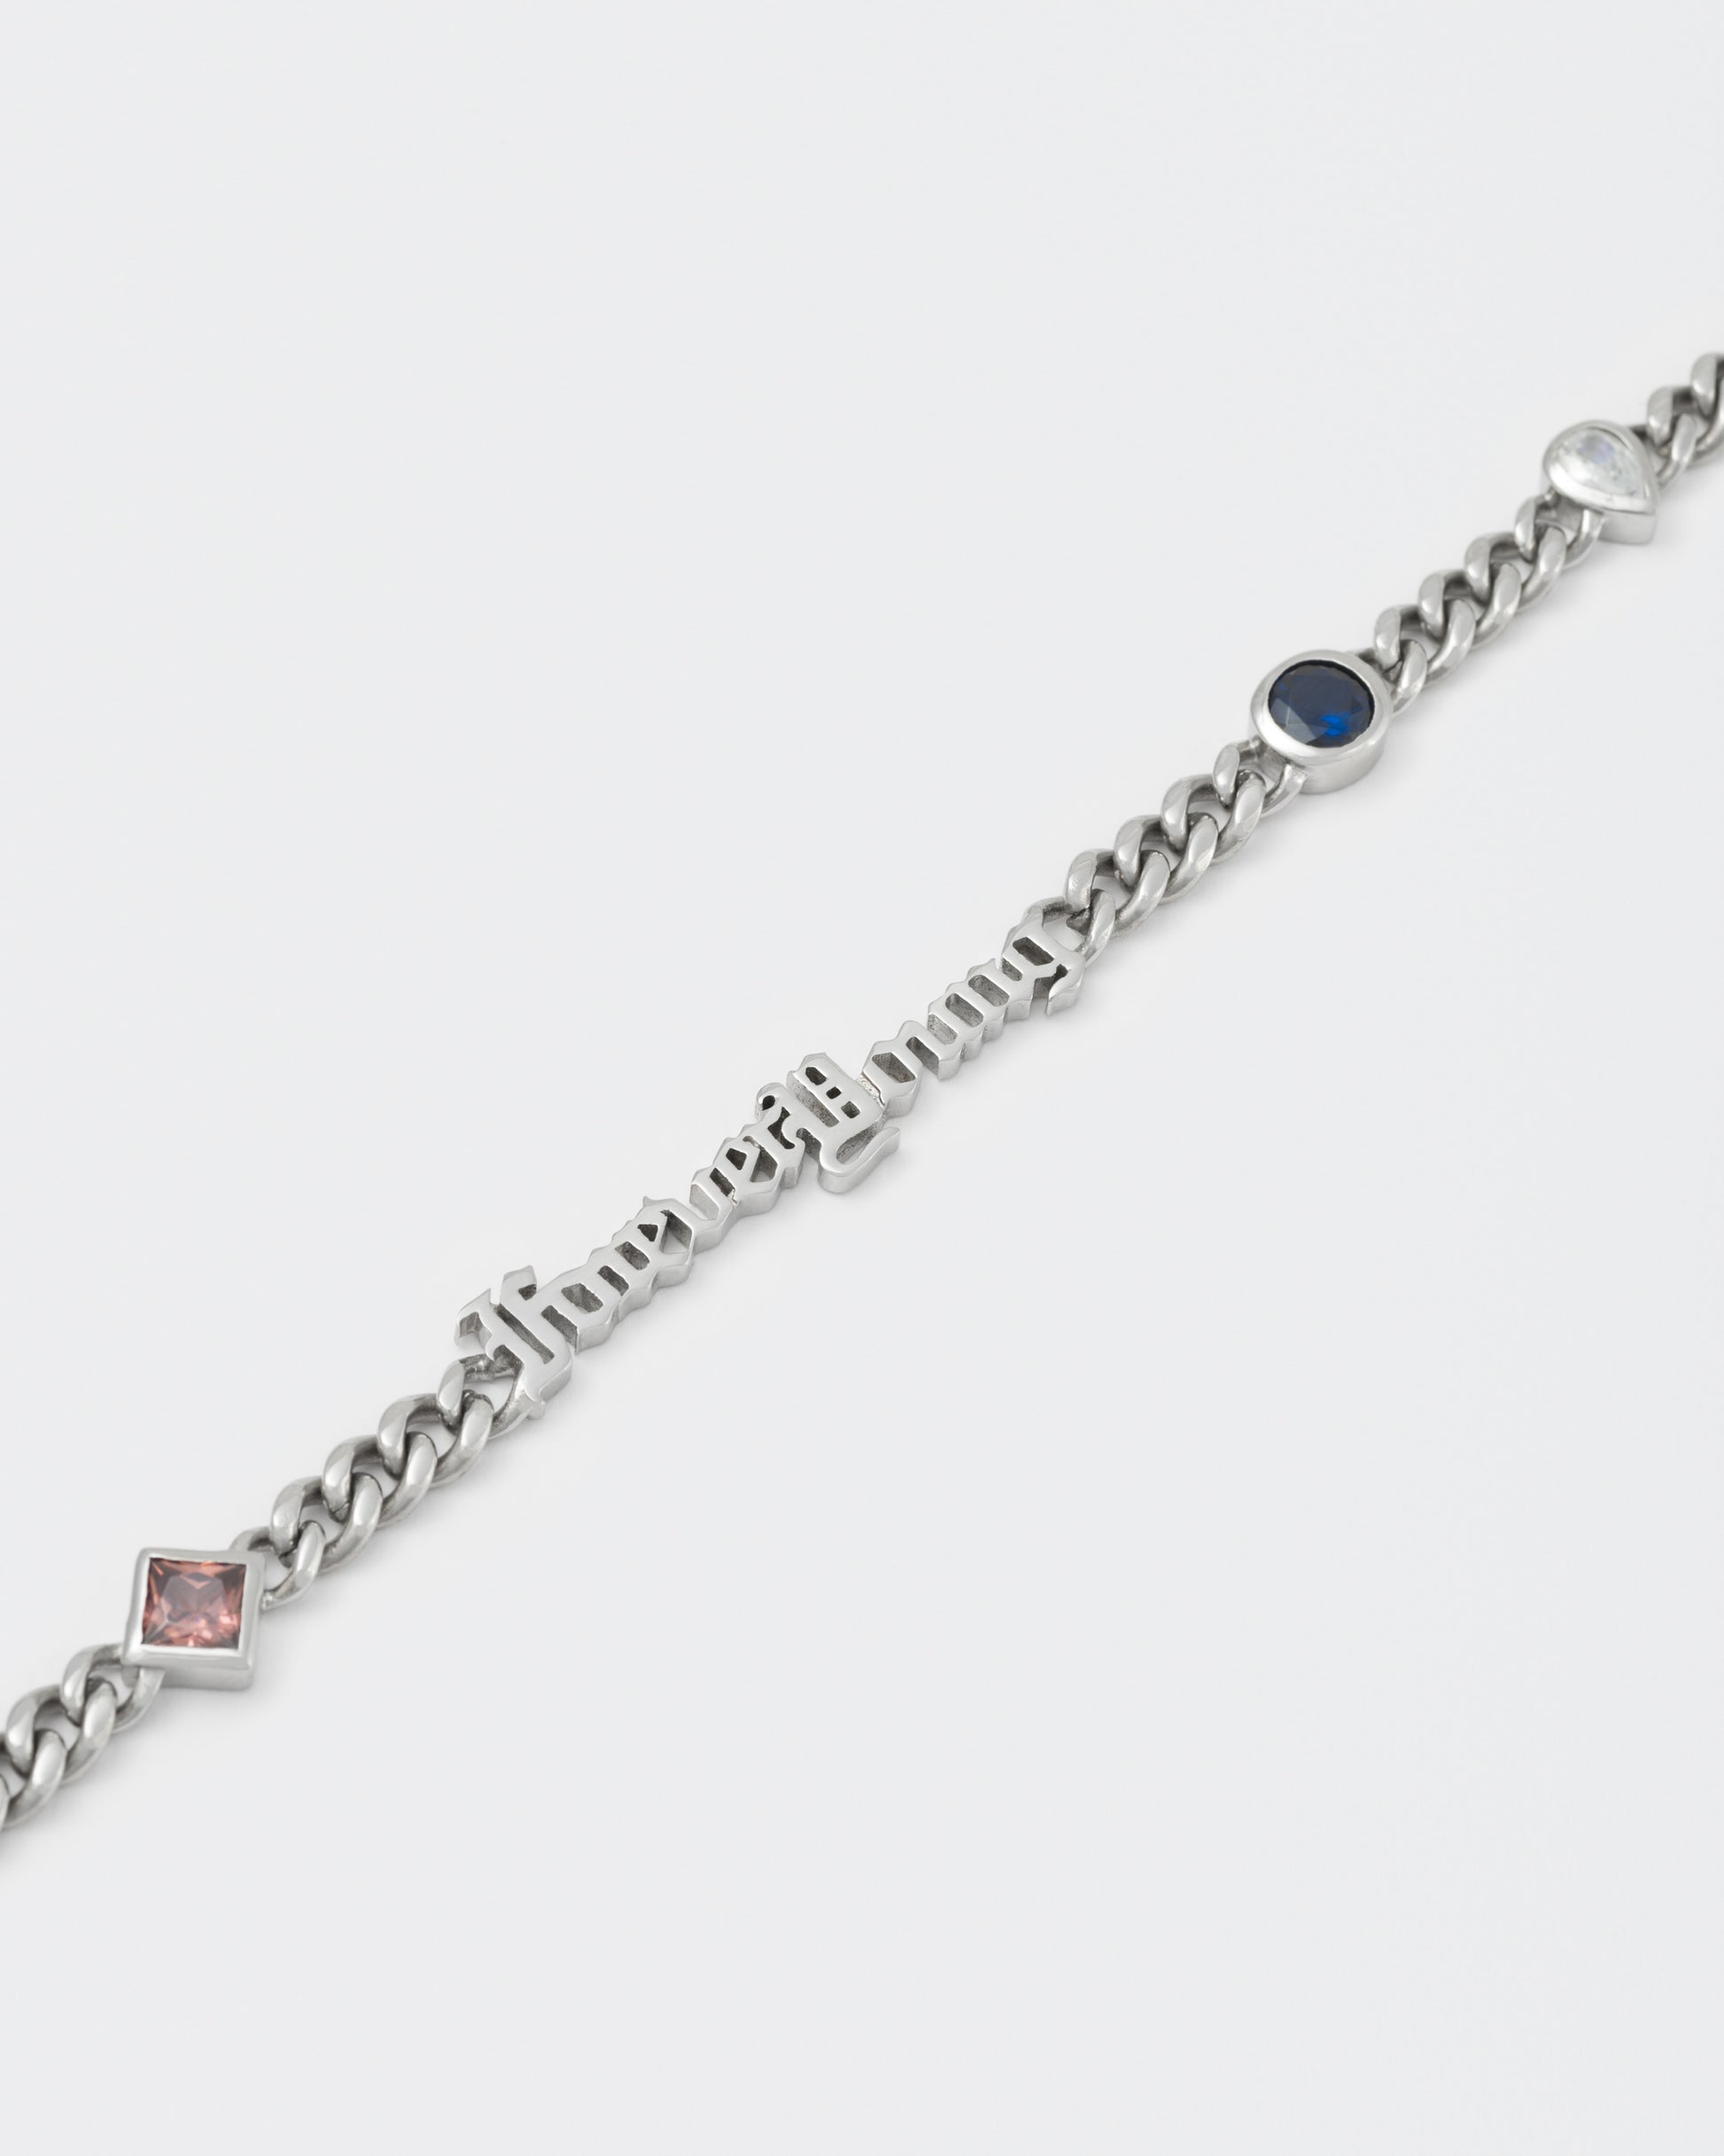 detail of forever Young cuban chain bracelet with 18kt white gold coating, mixed shape bezel stones in diamond white, burna blue, green, chocolate and "Forever Young" central metal tag